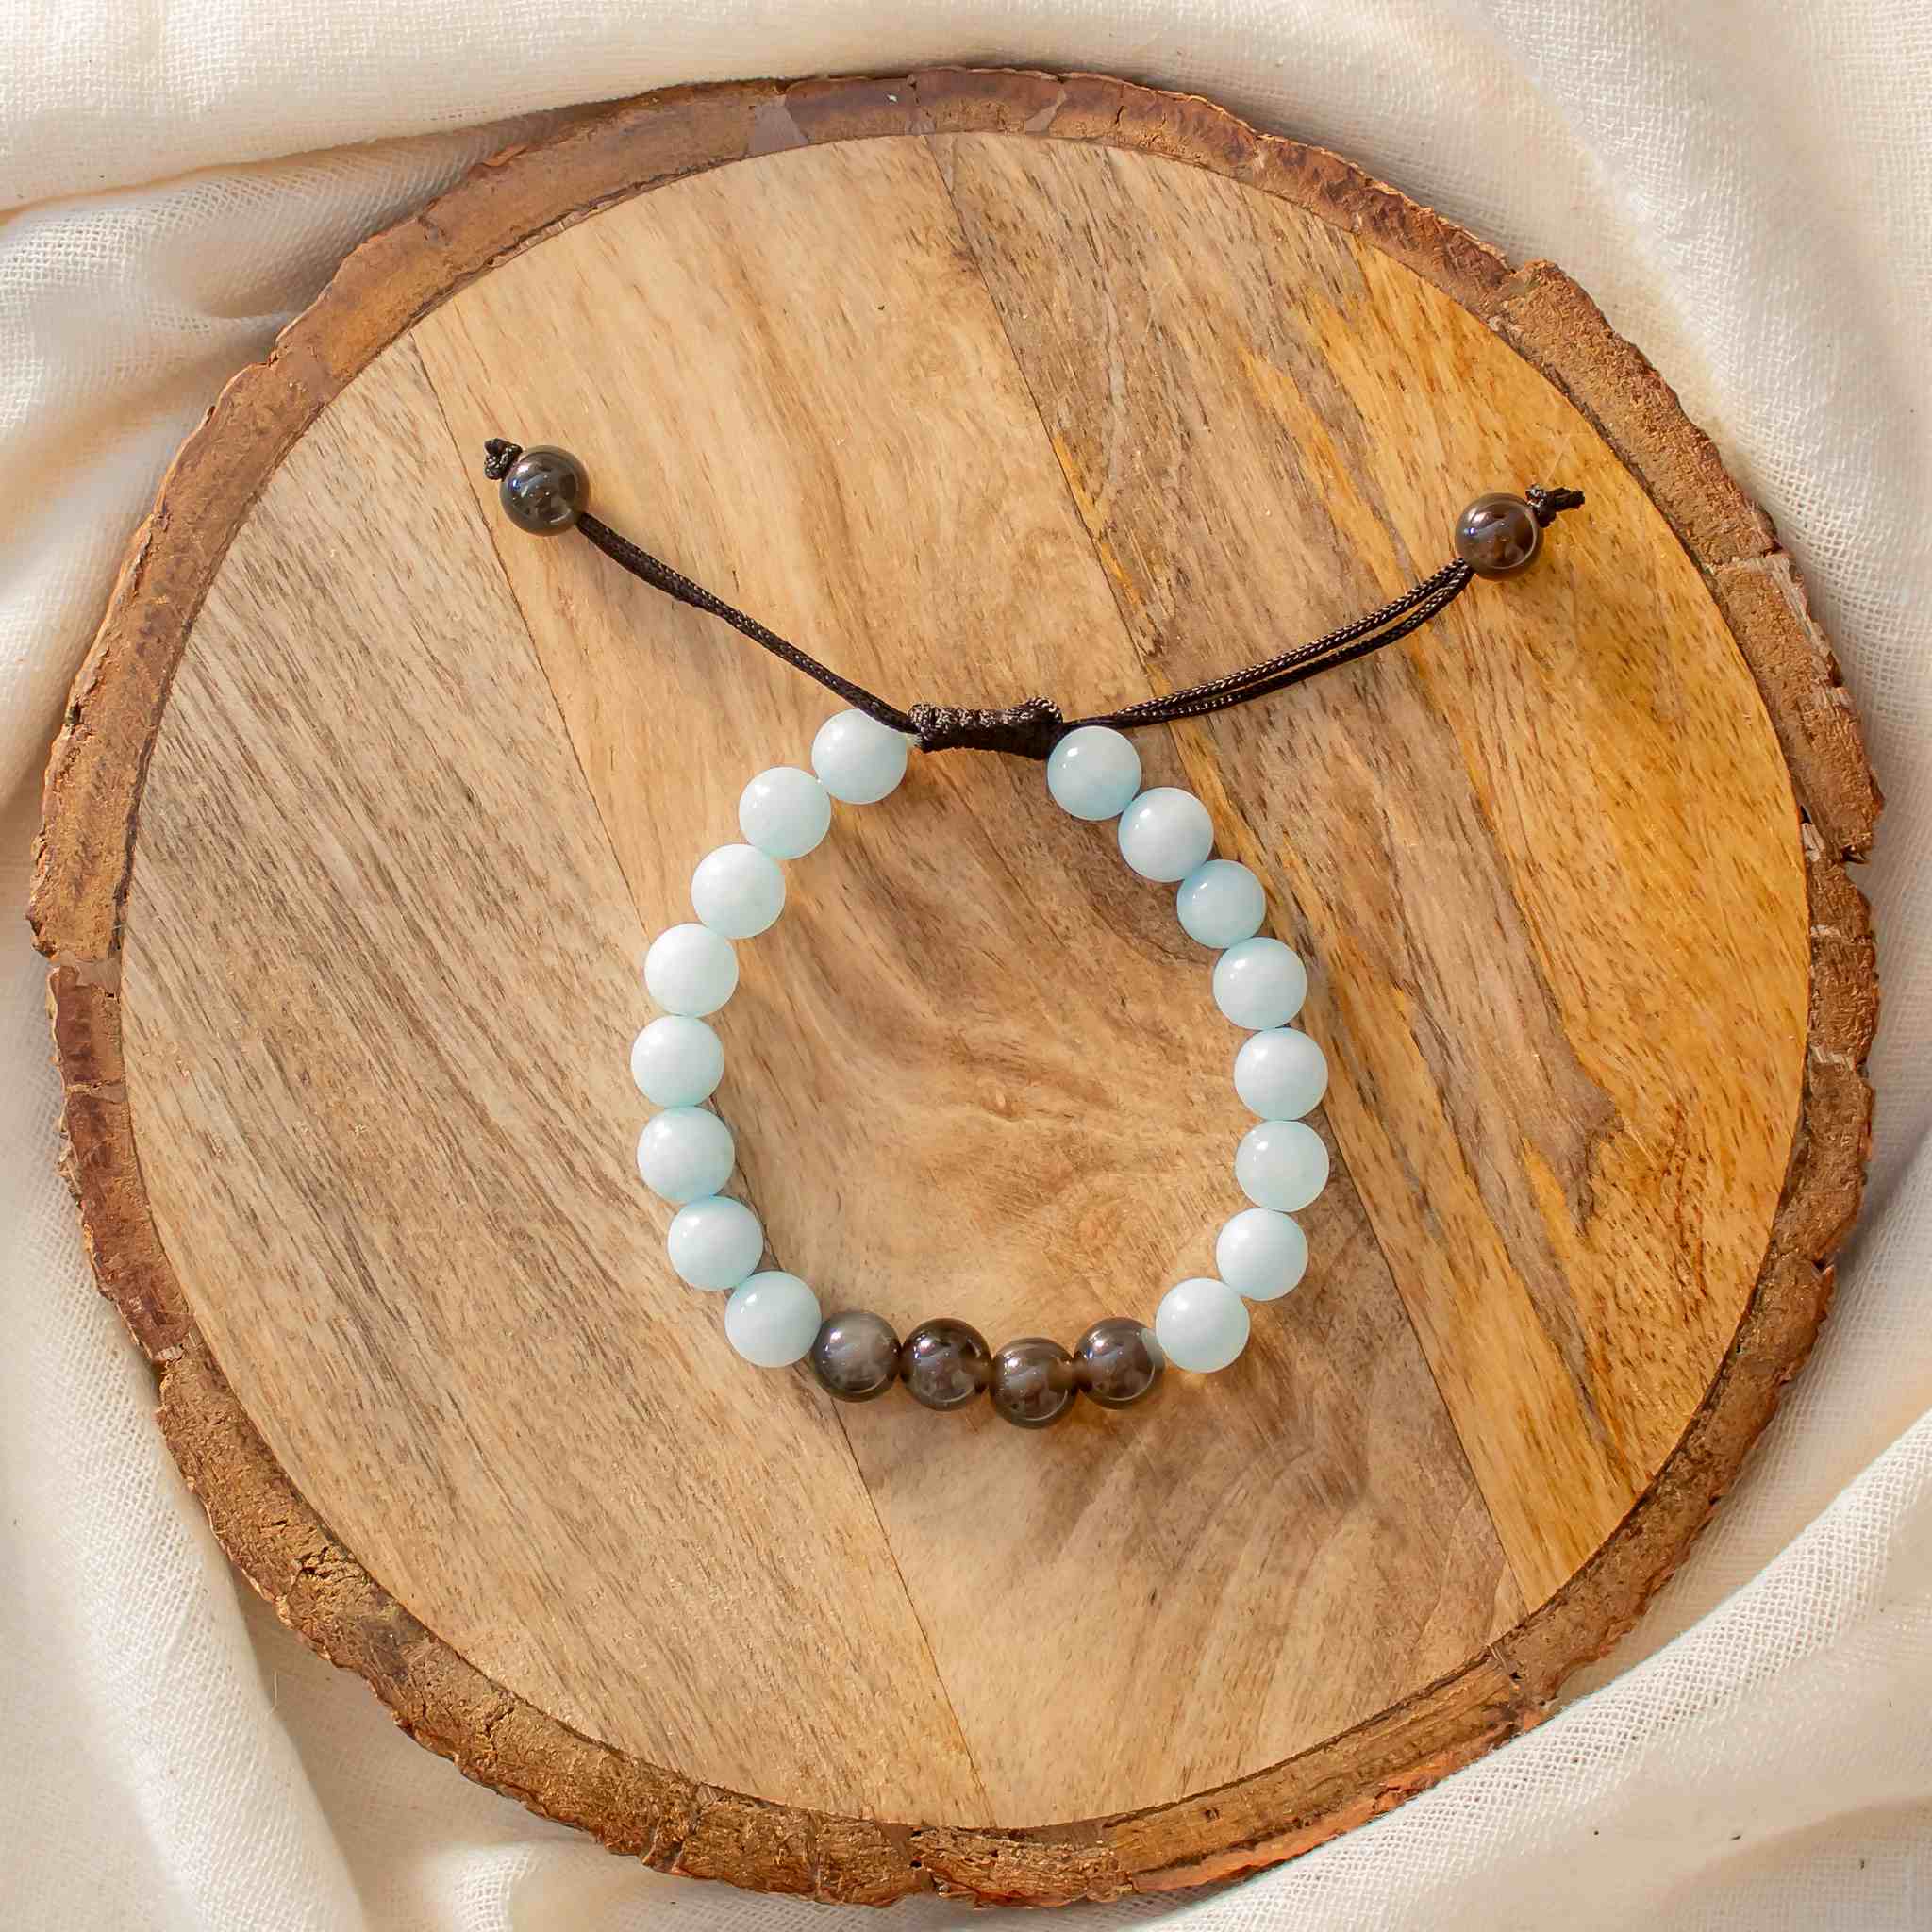 27 DIY Friendship Bracelets You'll Actually Want To Wear